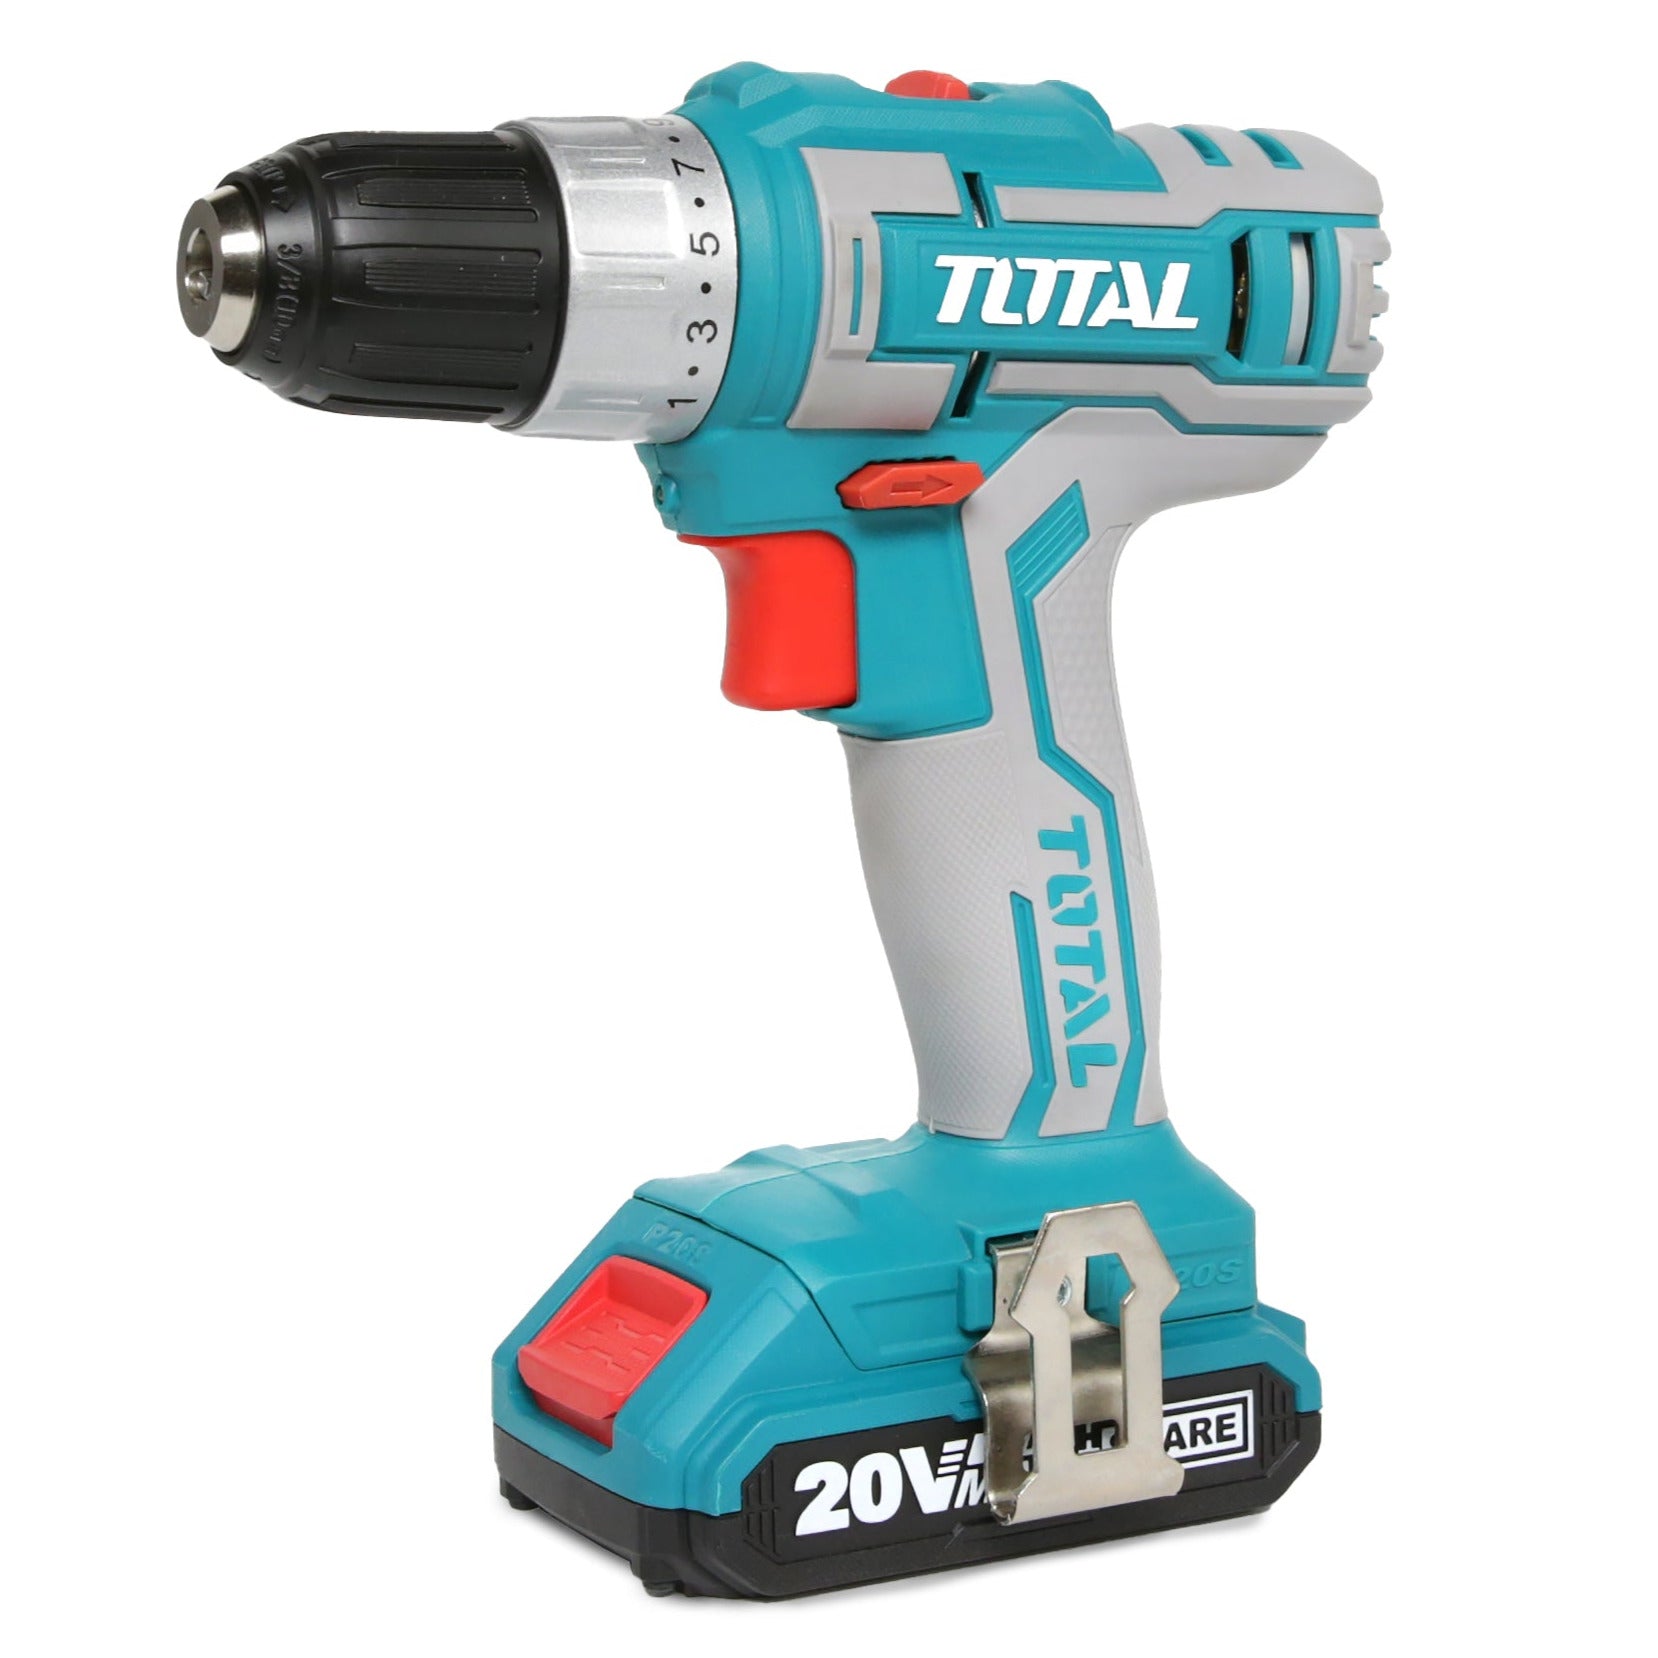 Total Li-Ion 20V Cordless Drill (with 2 x Batteries & Charger) - TDLI2002